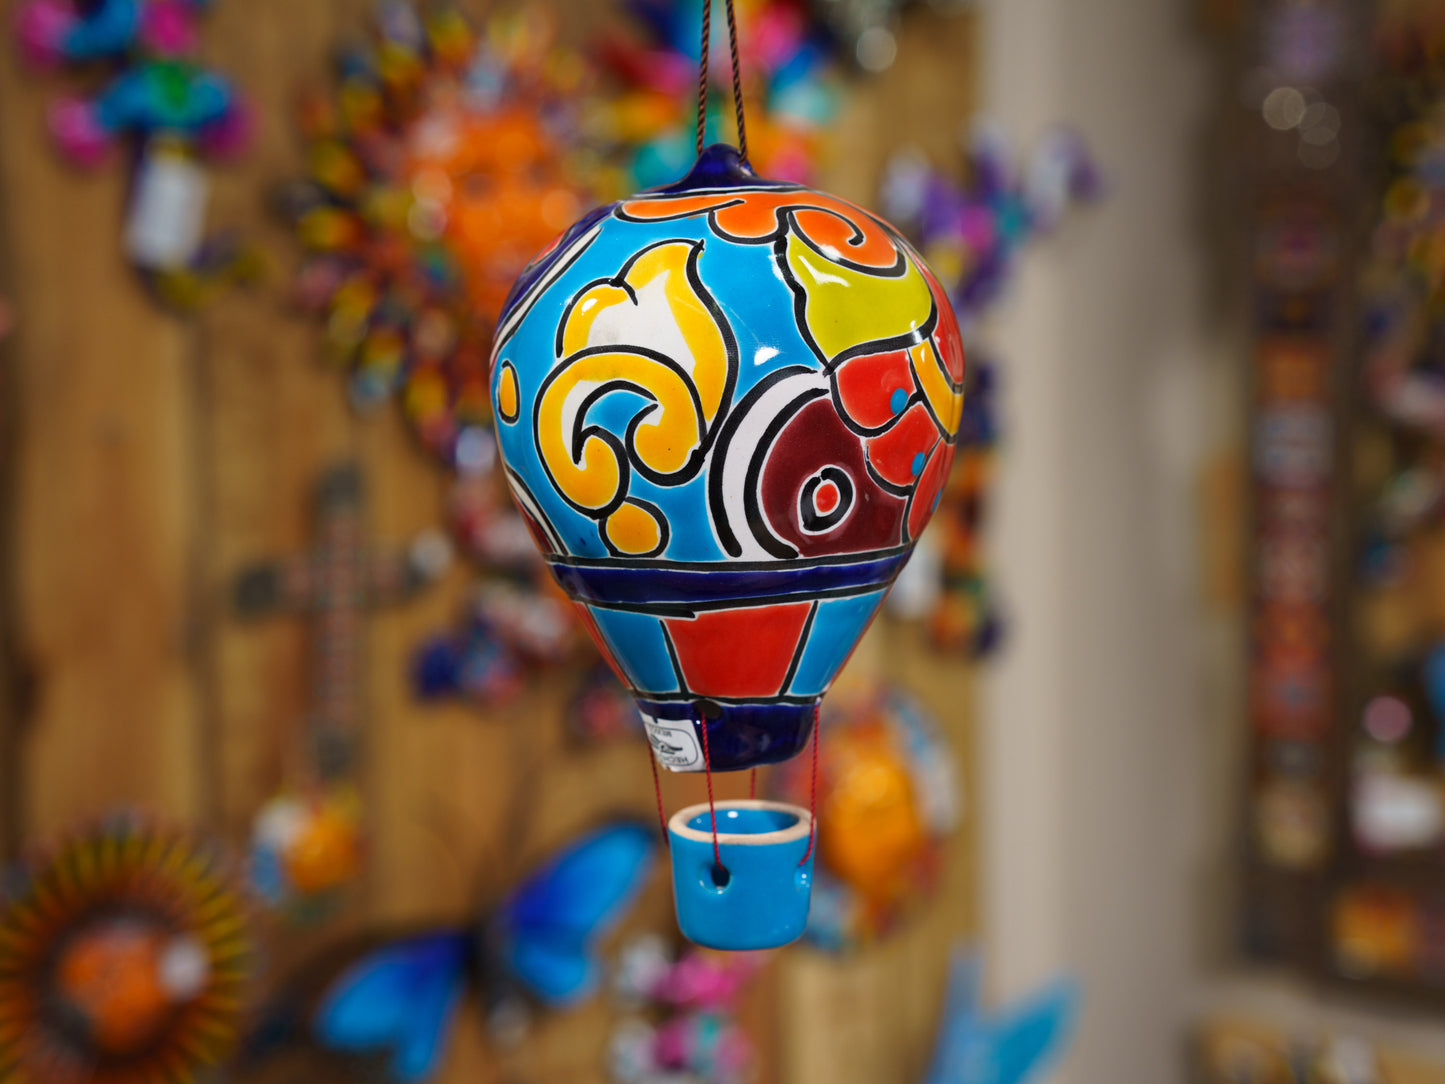 Hanging Hot Air Balloon - Small Turquoise